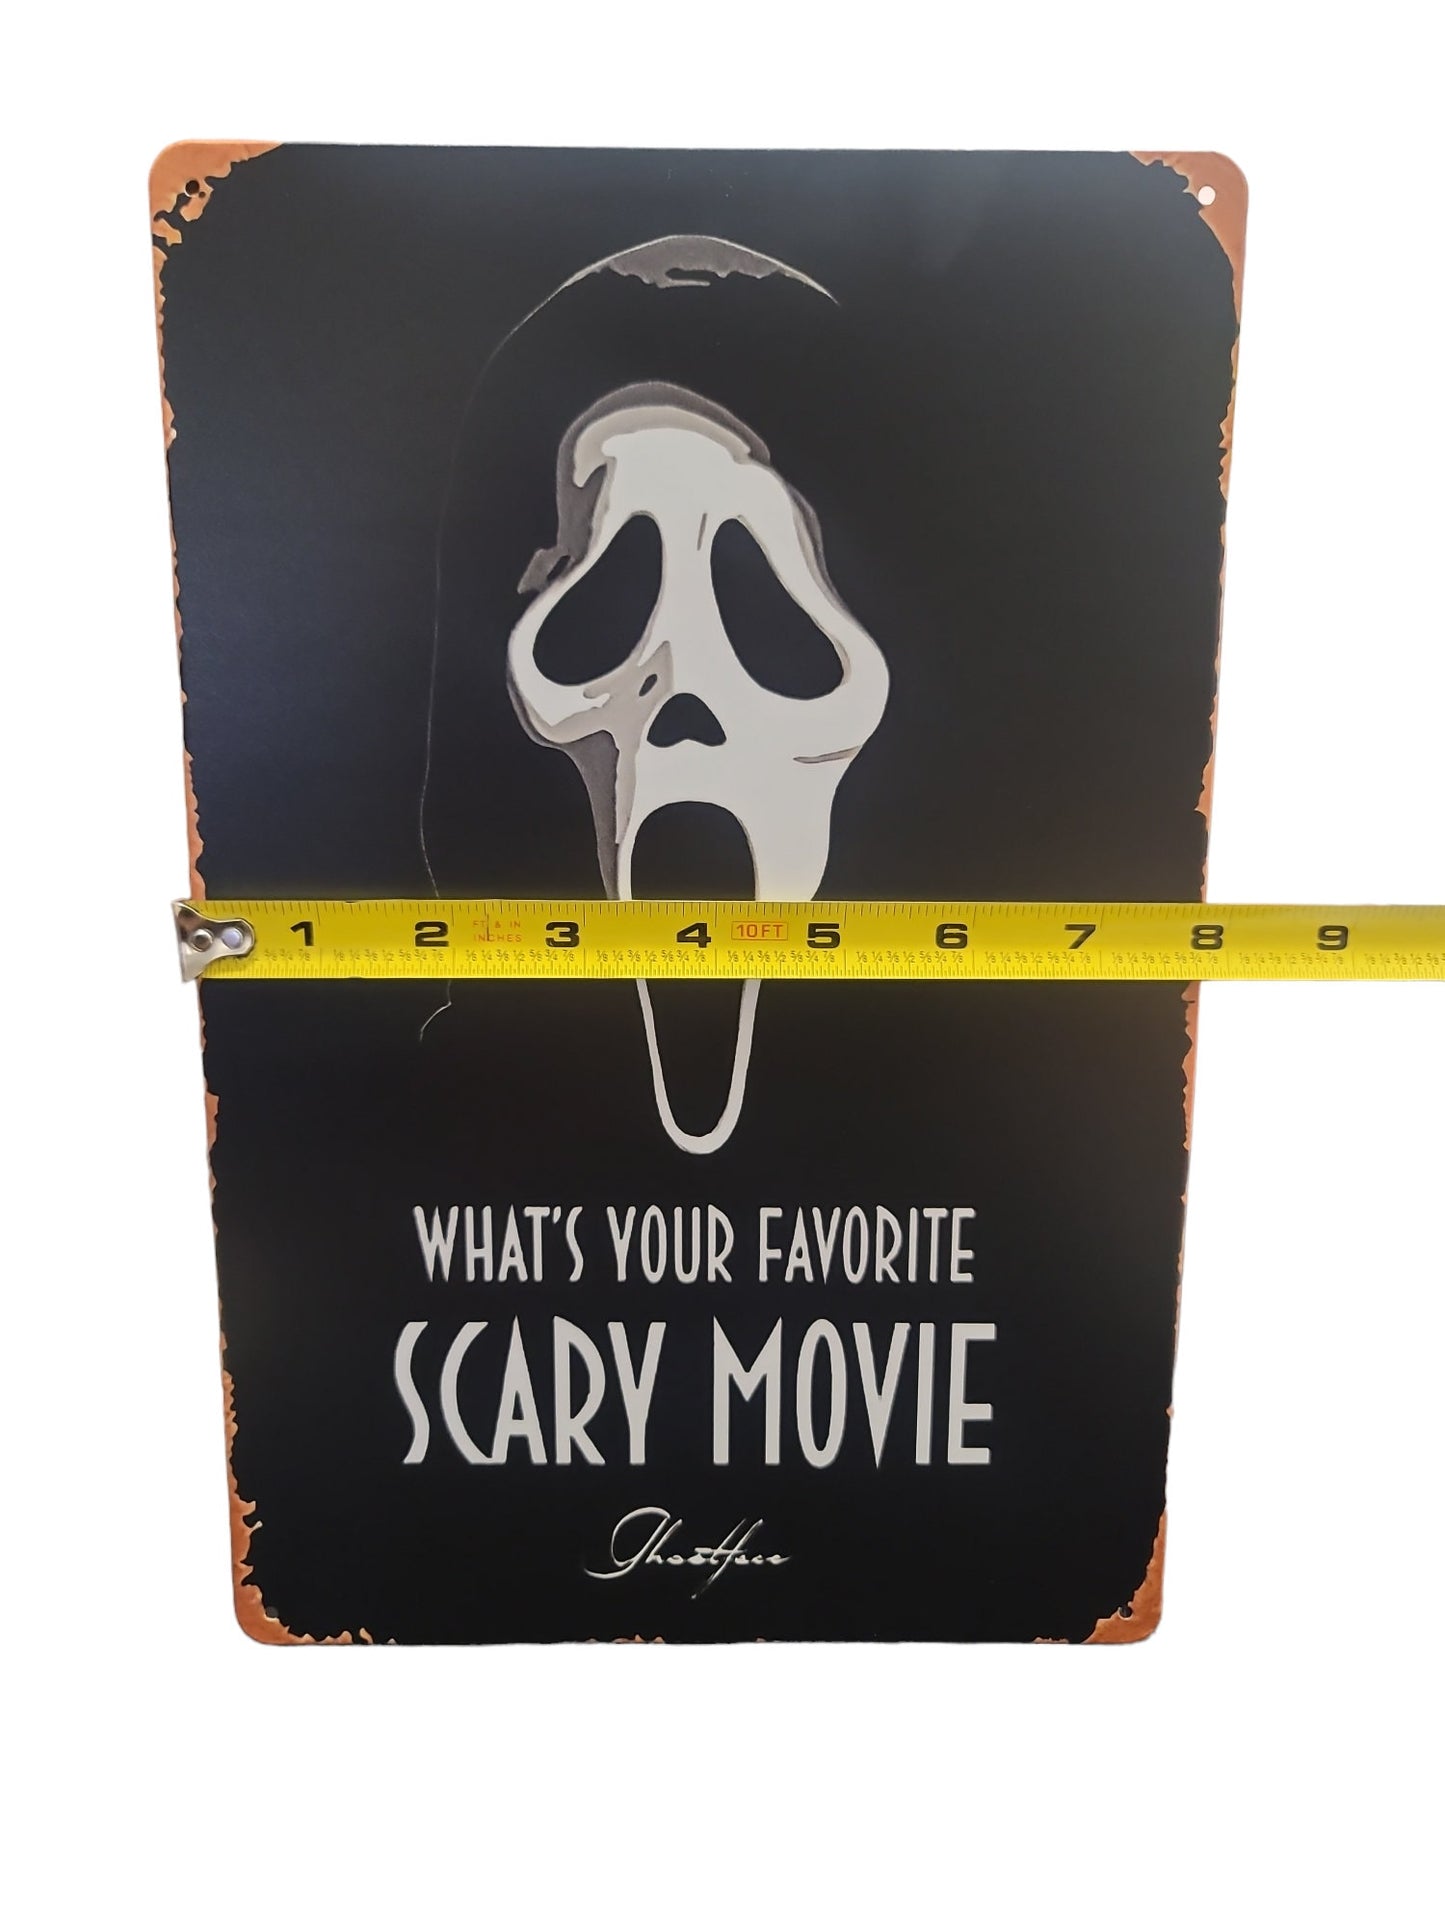 Scream metal tin sign what's your favorite scary movie Ghostface horror movie